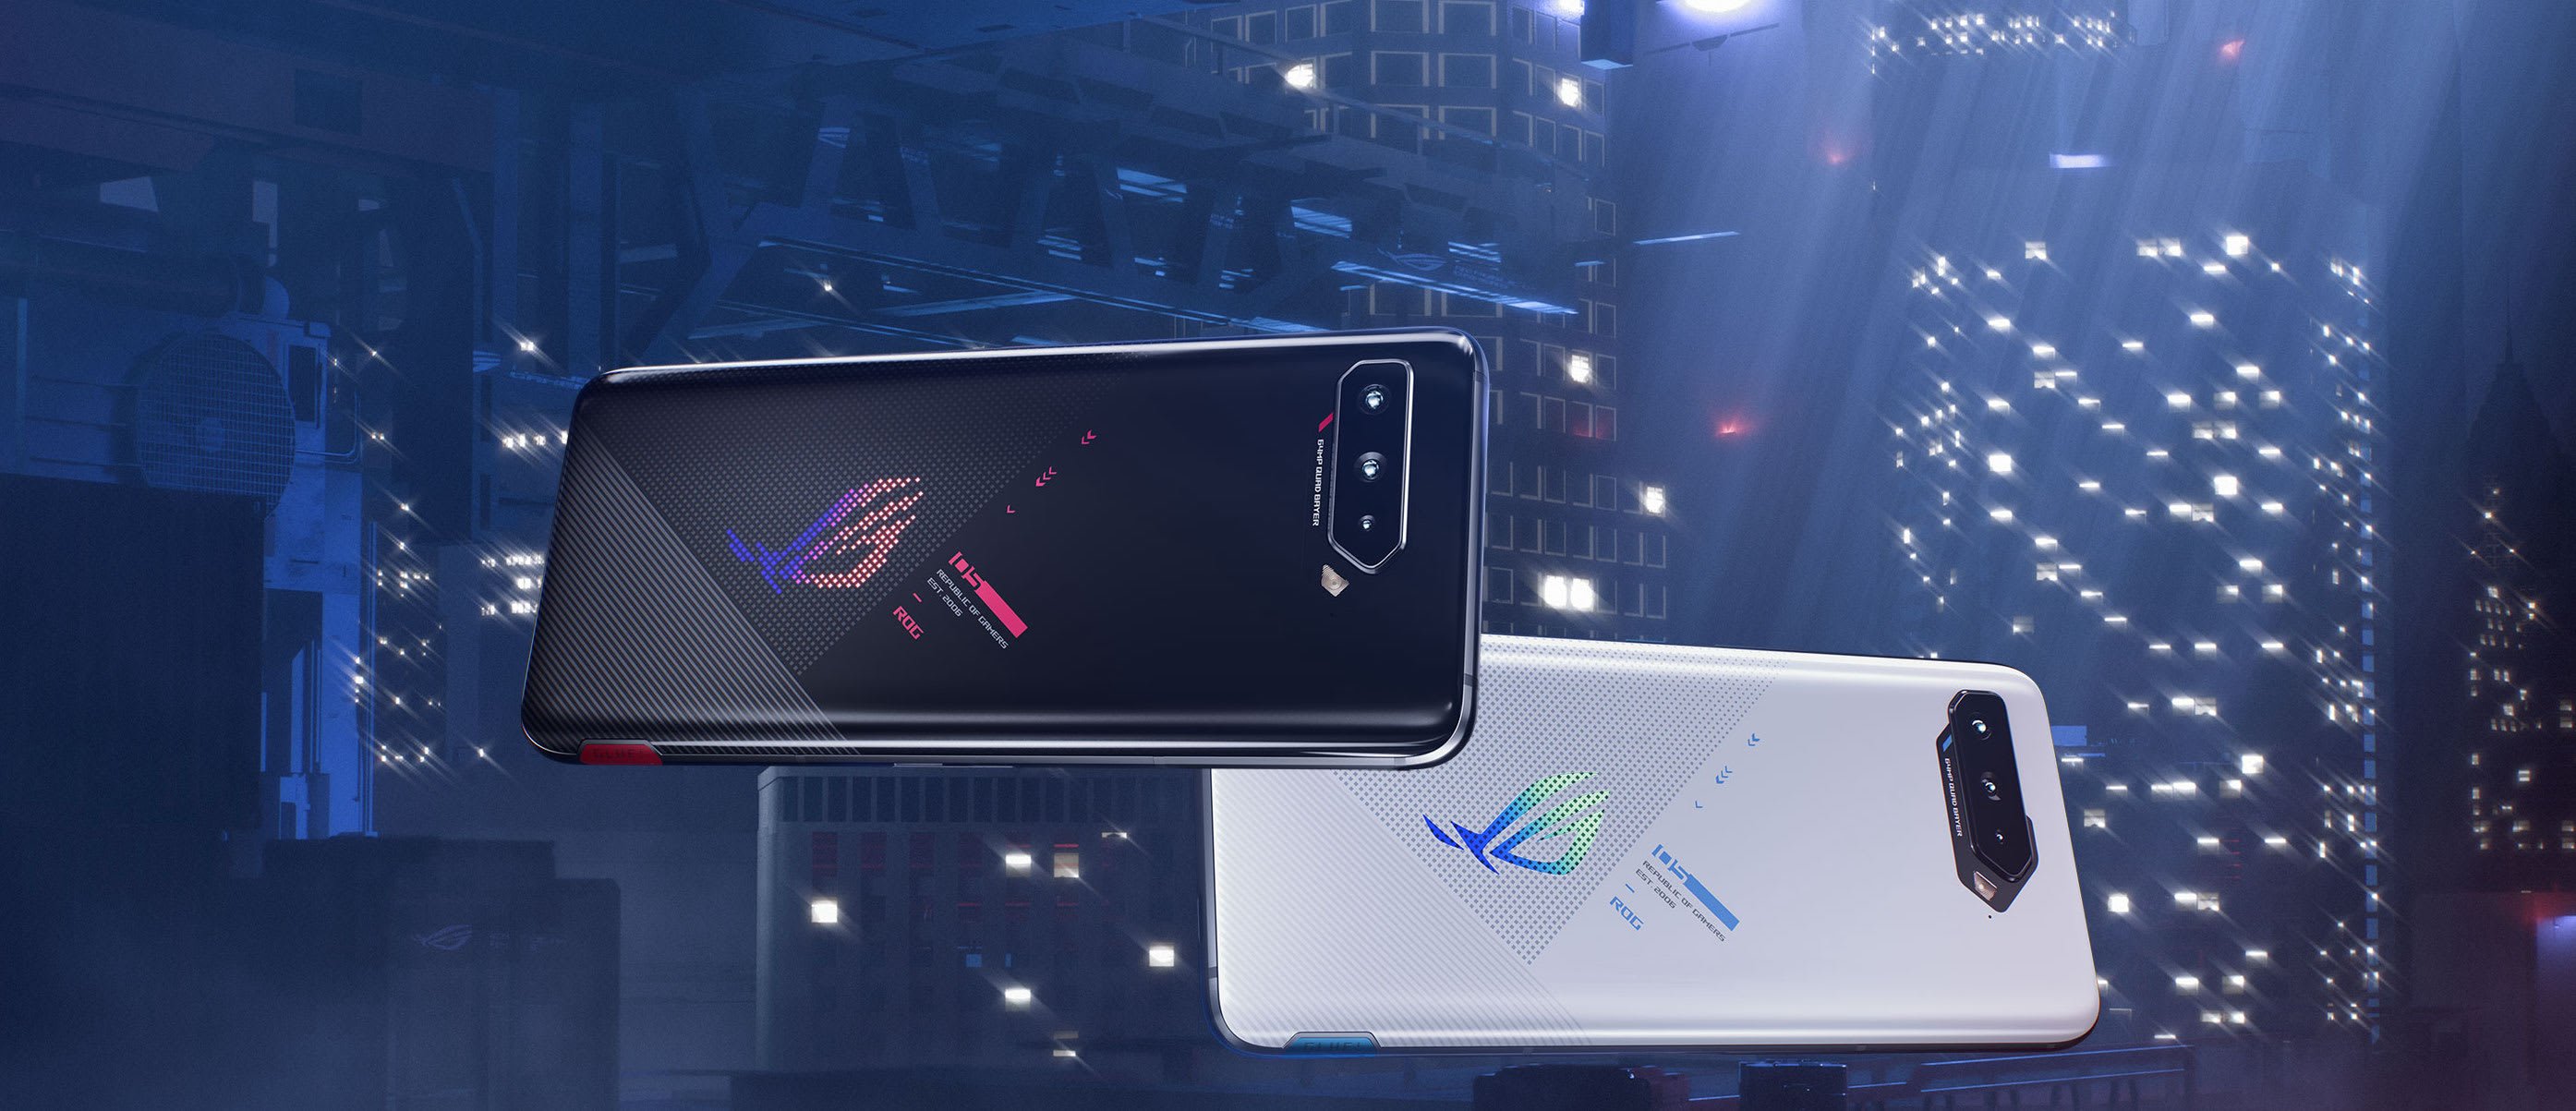 best-asus-smartphone-malaysia